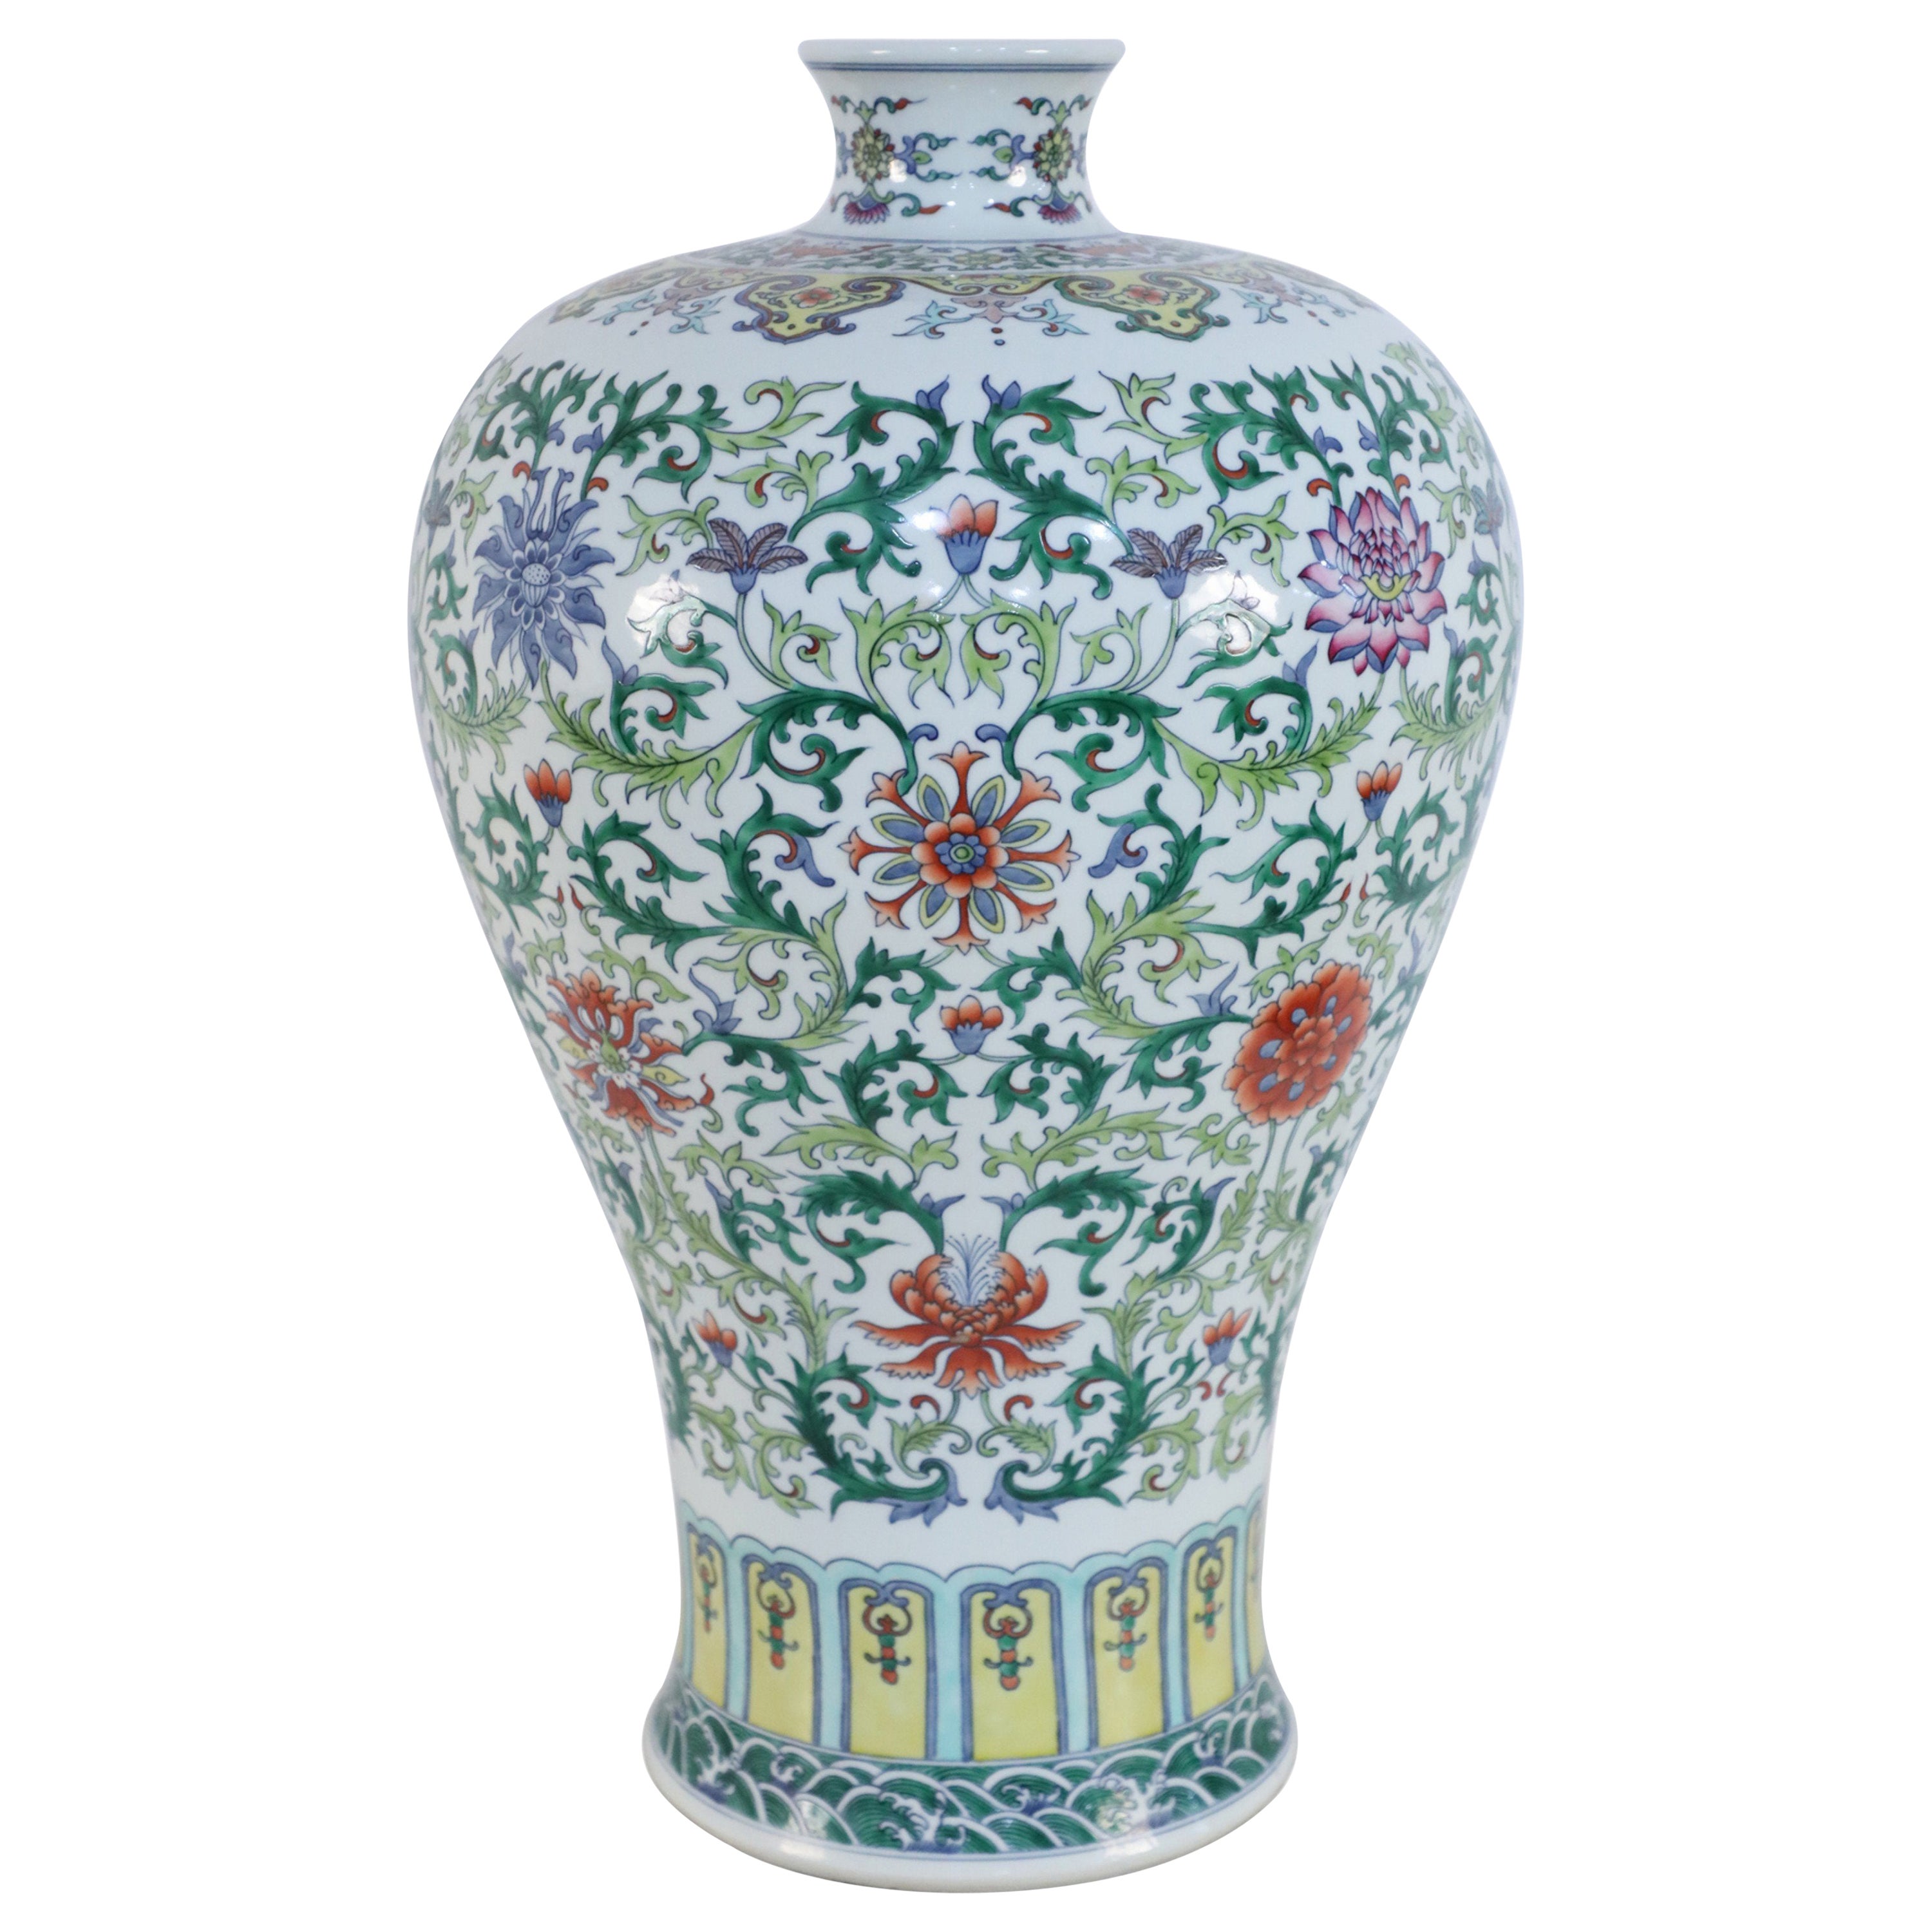 Chinese White and Multicolor Floral and Vine Motif Meiping Porcelain Urn